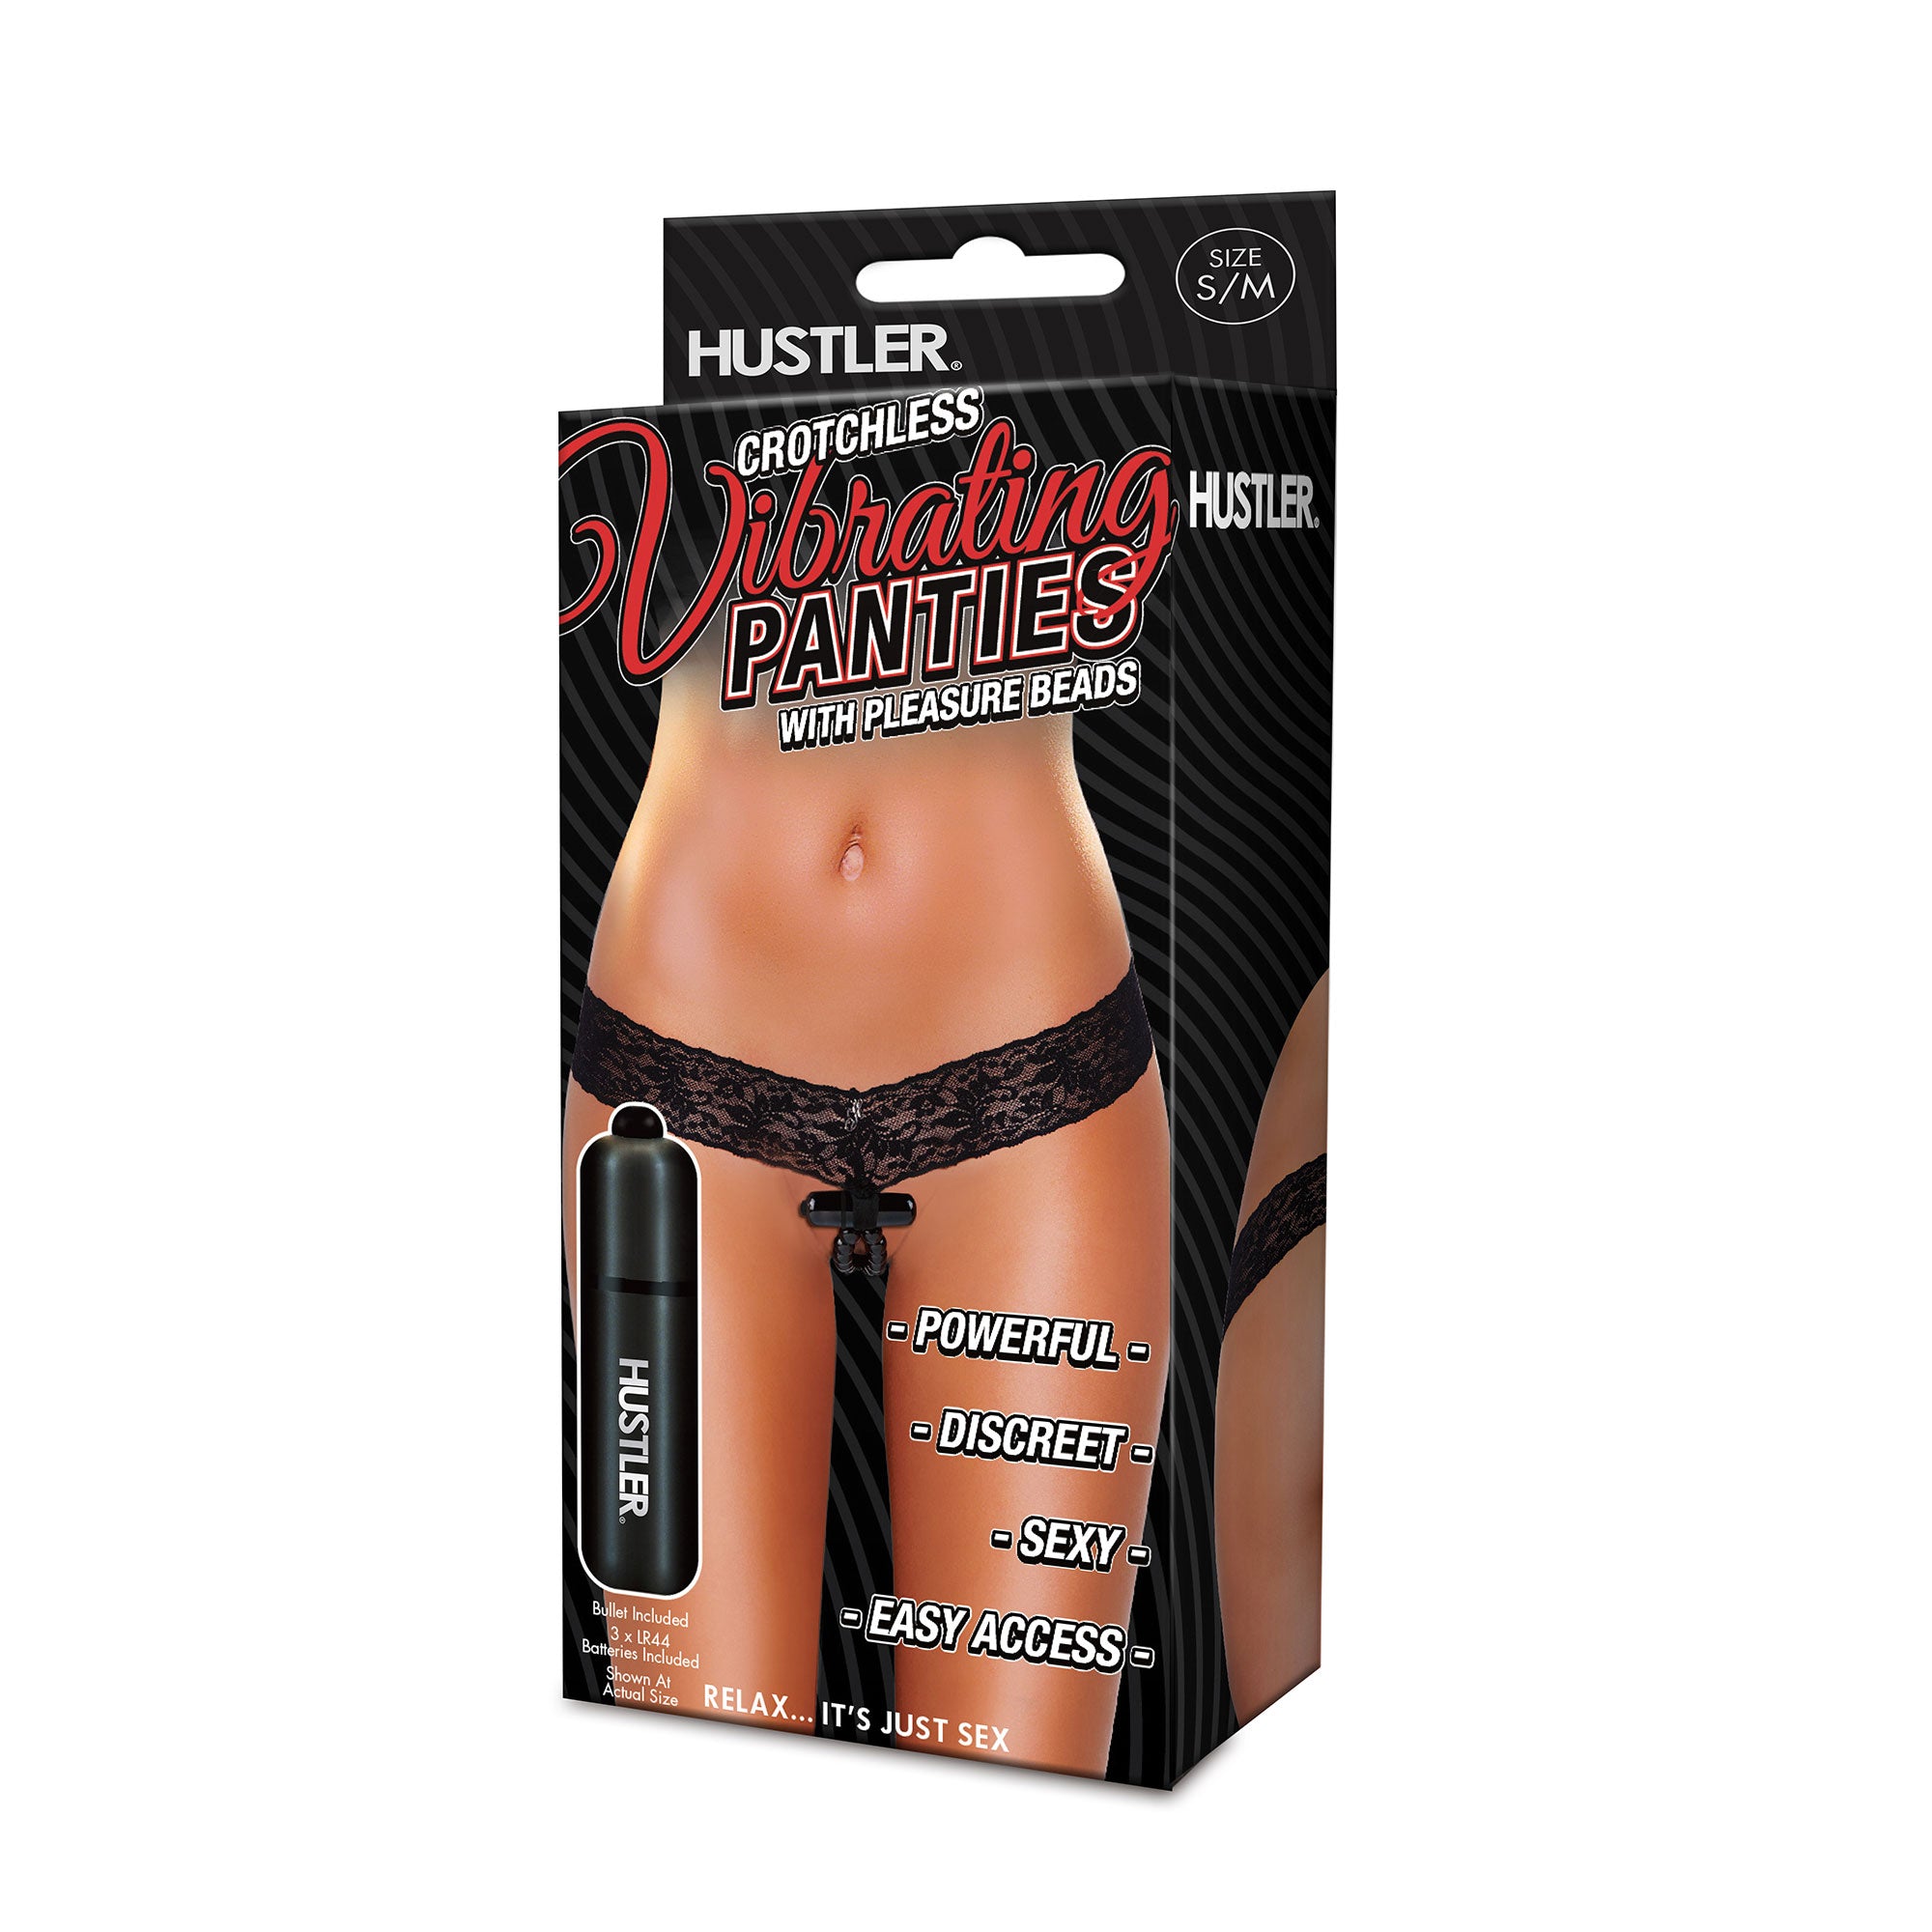 Hustler Crotchless Vibrating Lace Panties with Pleasure Beads